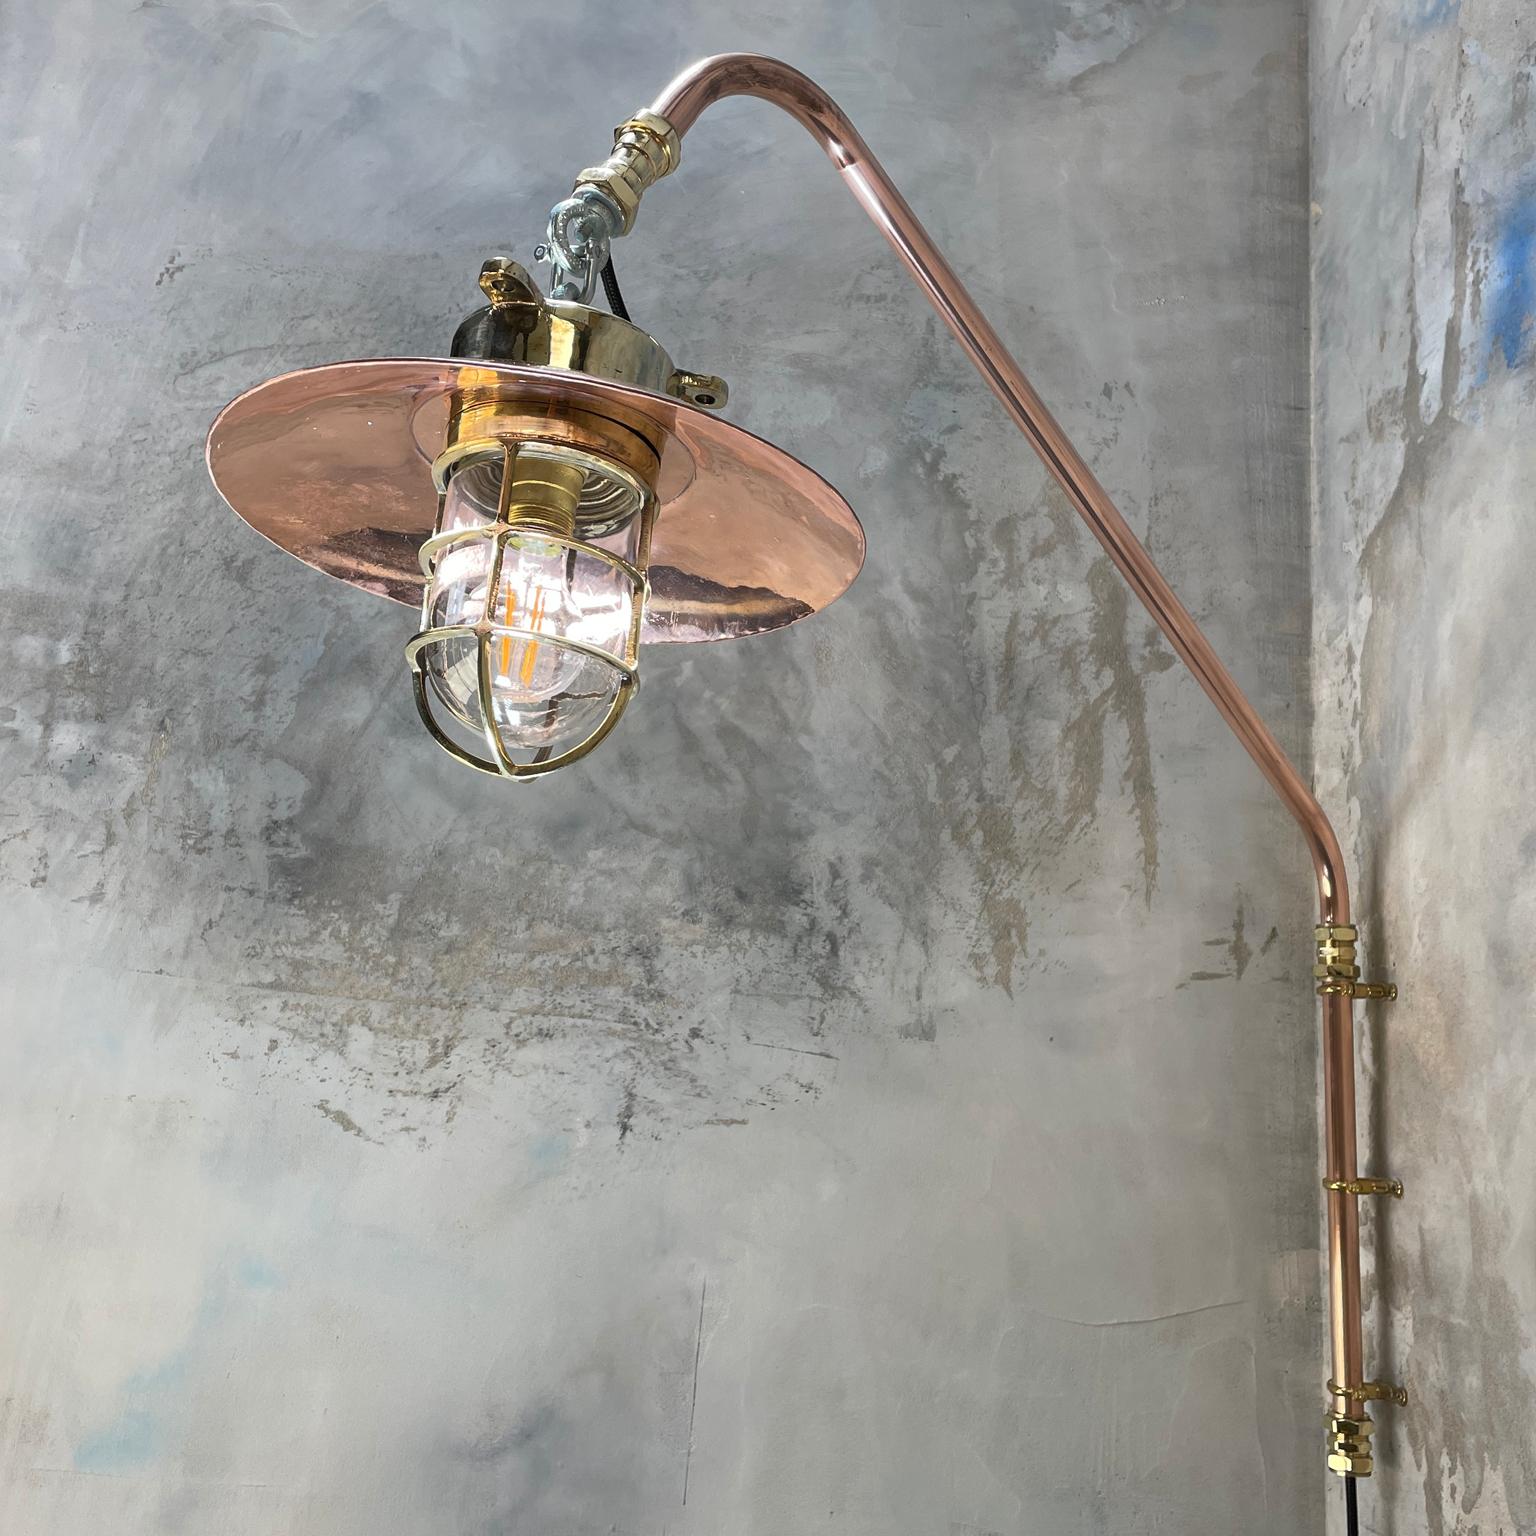 1970s Copper & Brass Cantilever Explosion Proof Pendant Lamp with Cage and Shade For Sale 3